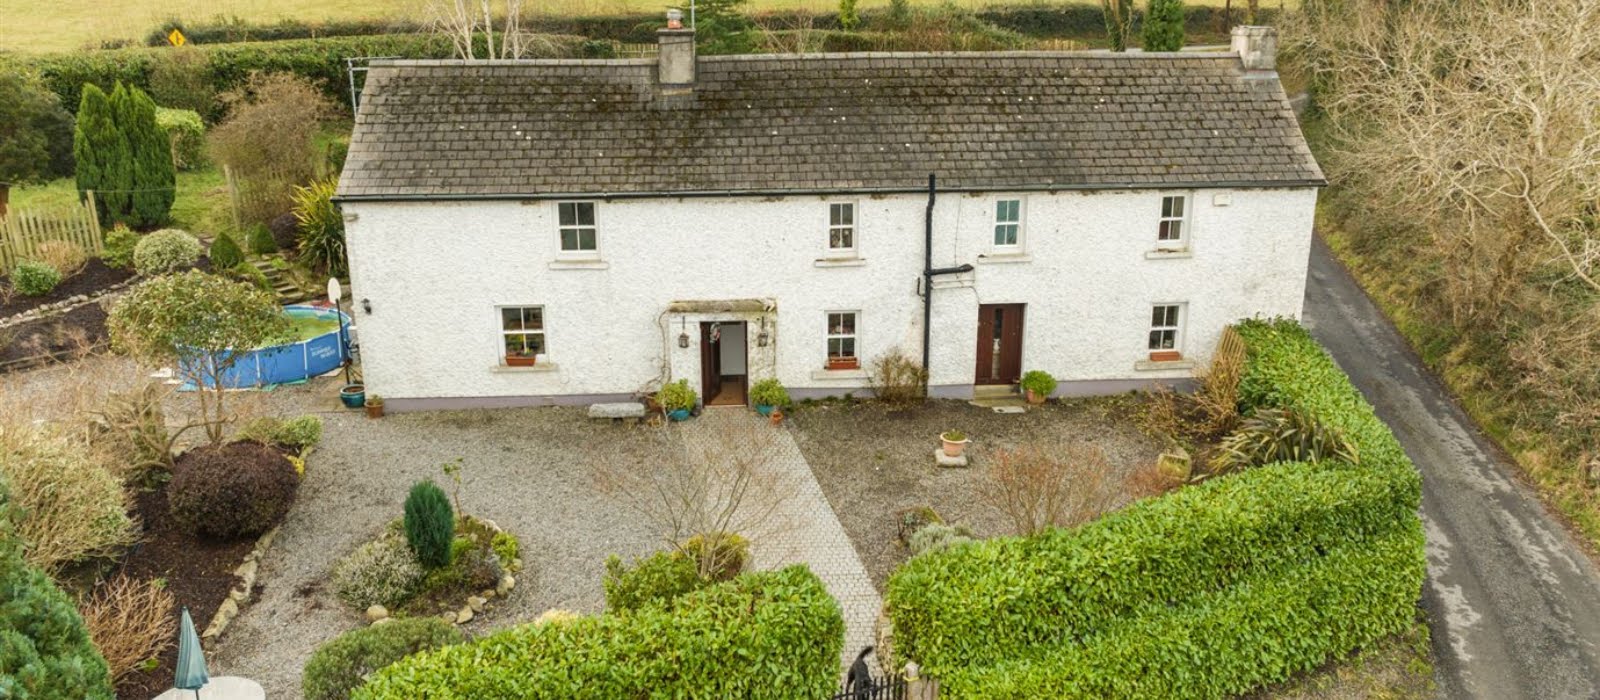 This modern farmhouse in Enniskerry is on the market for €945,000